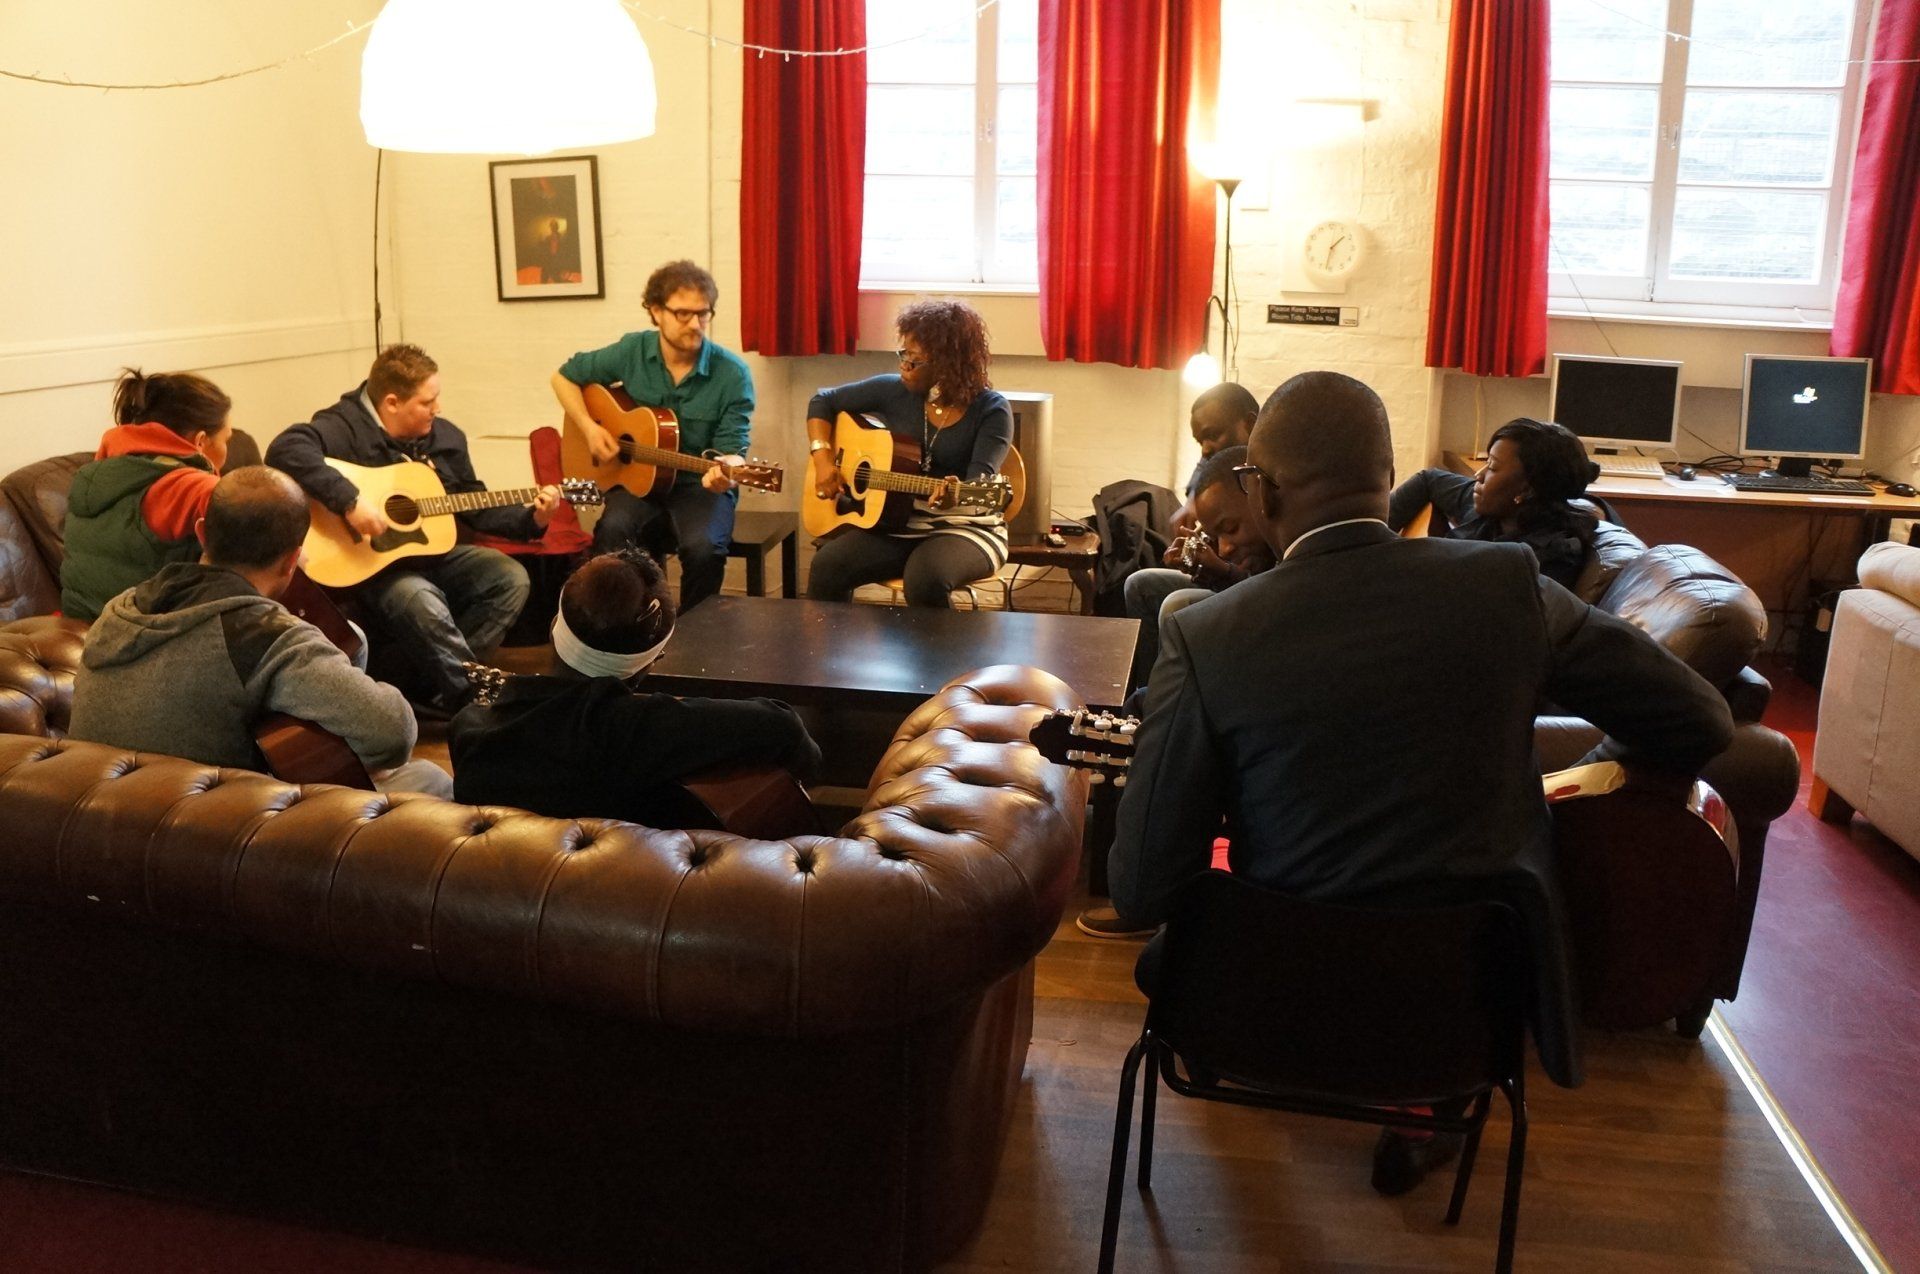 a group of people are playing guitars in a living room